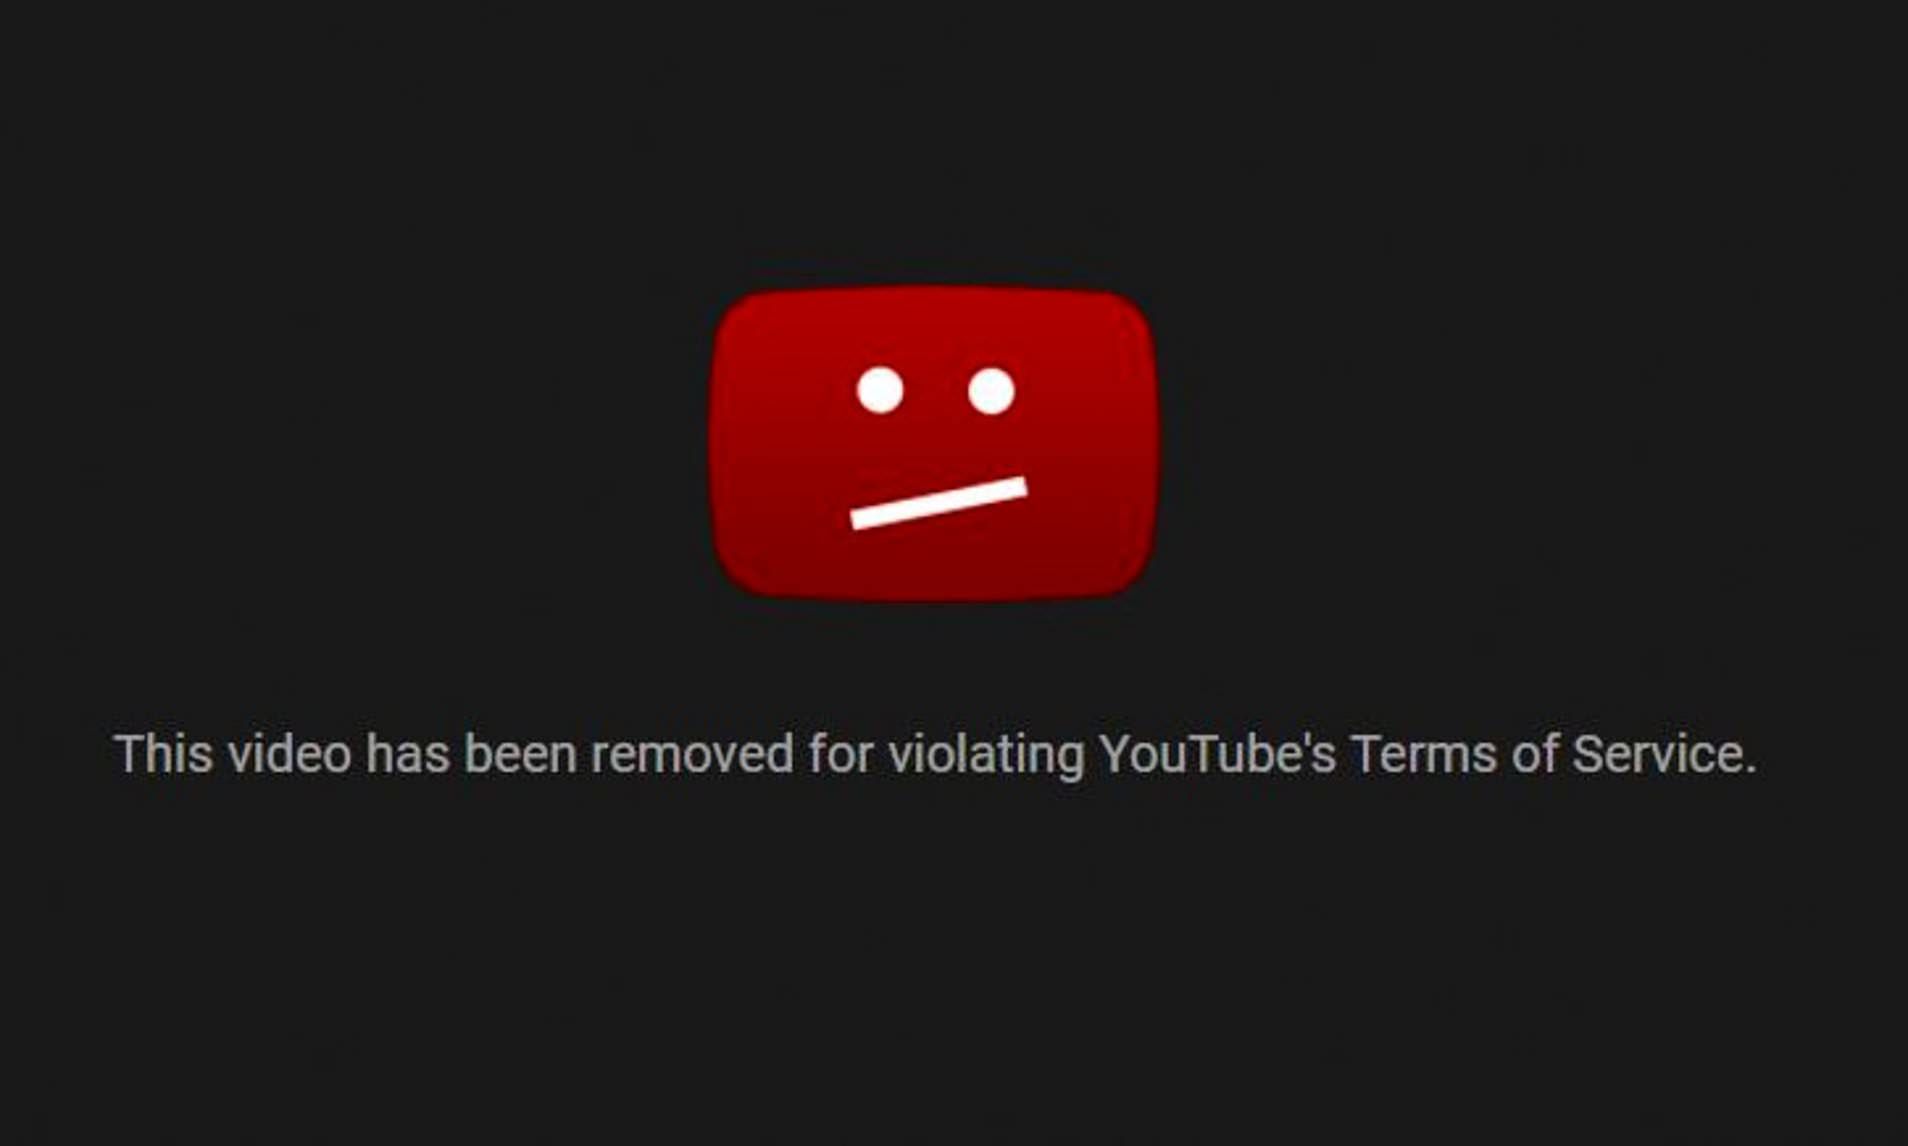 YouTube removed video